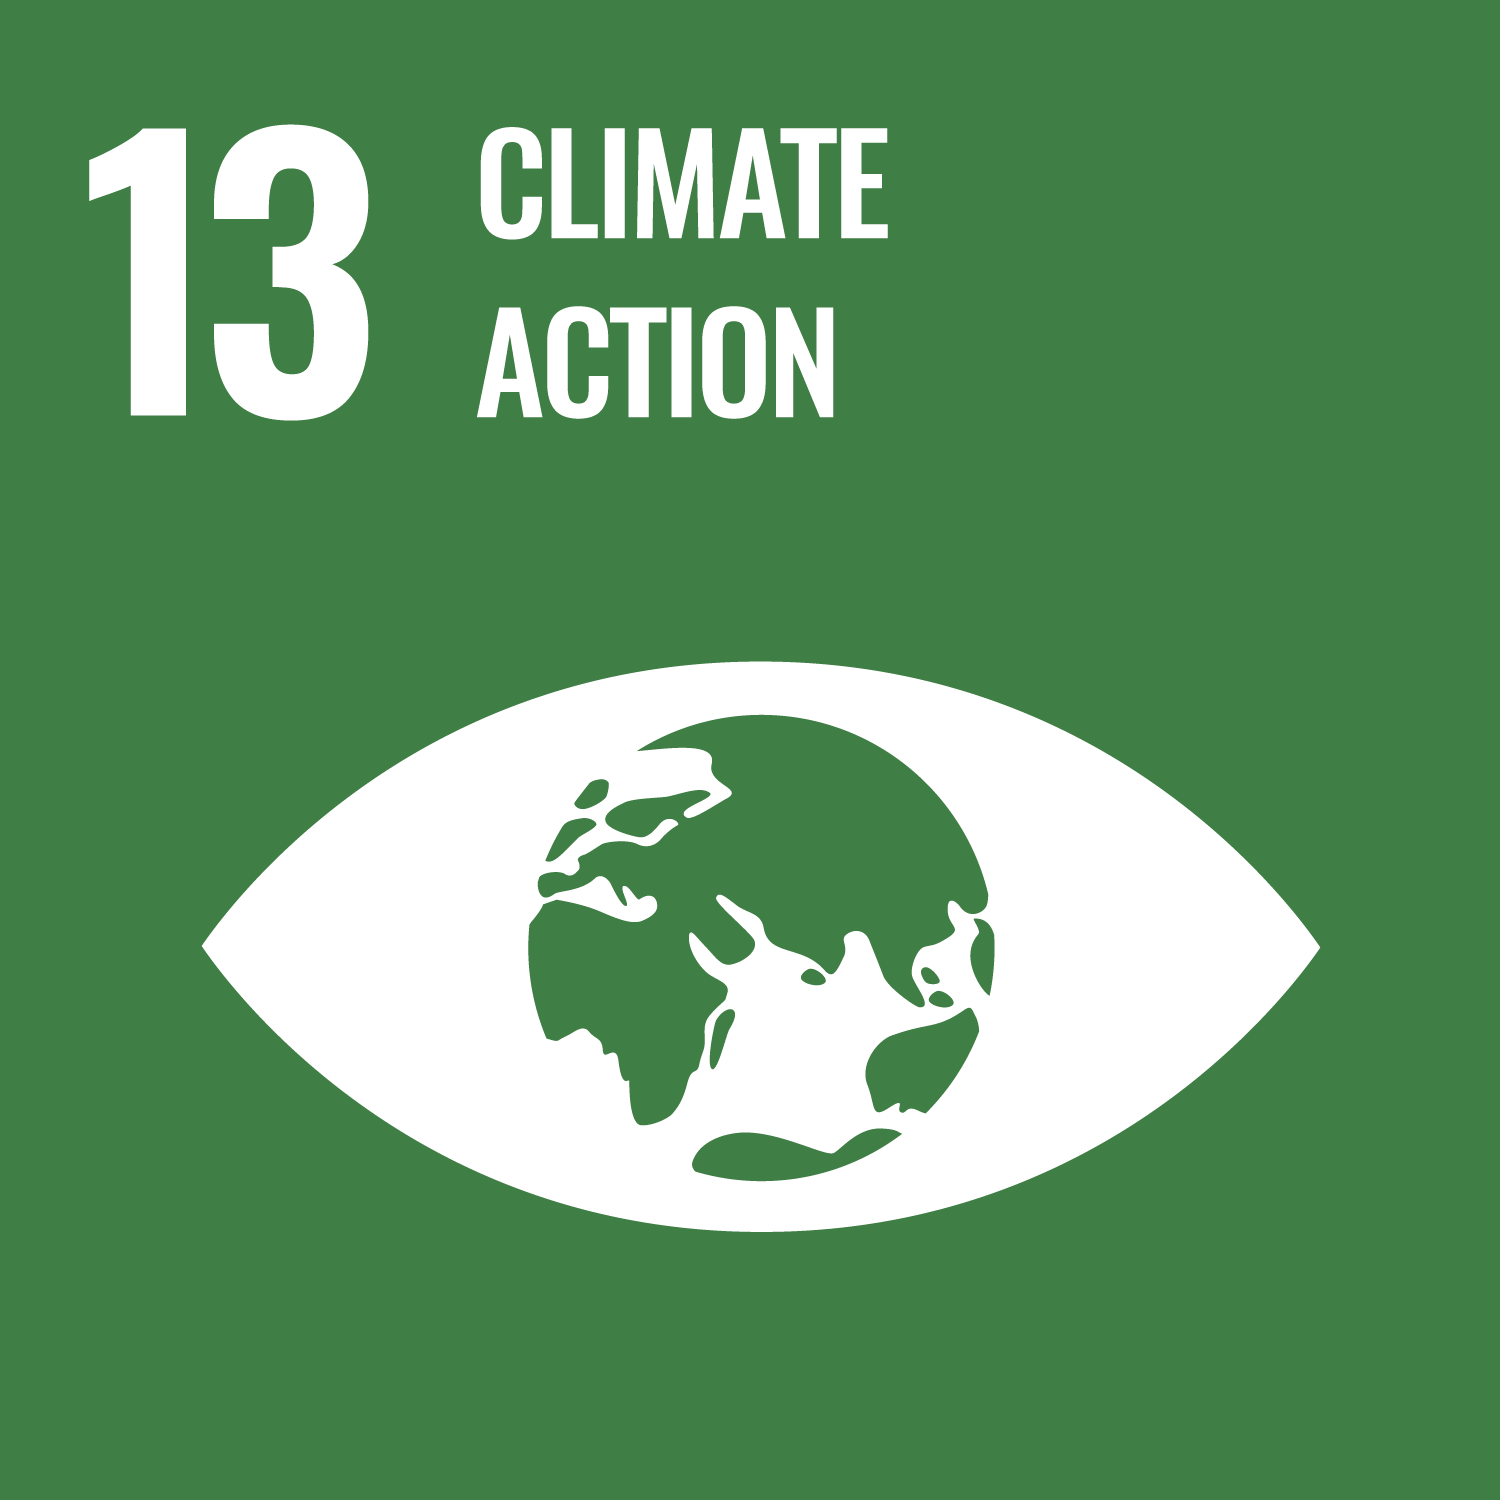 United Nation's 17 Sustainable Development Goals: Goal Number 13: Climate Action